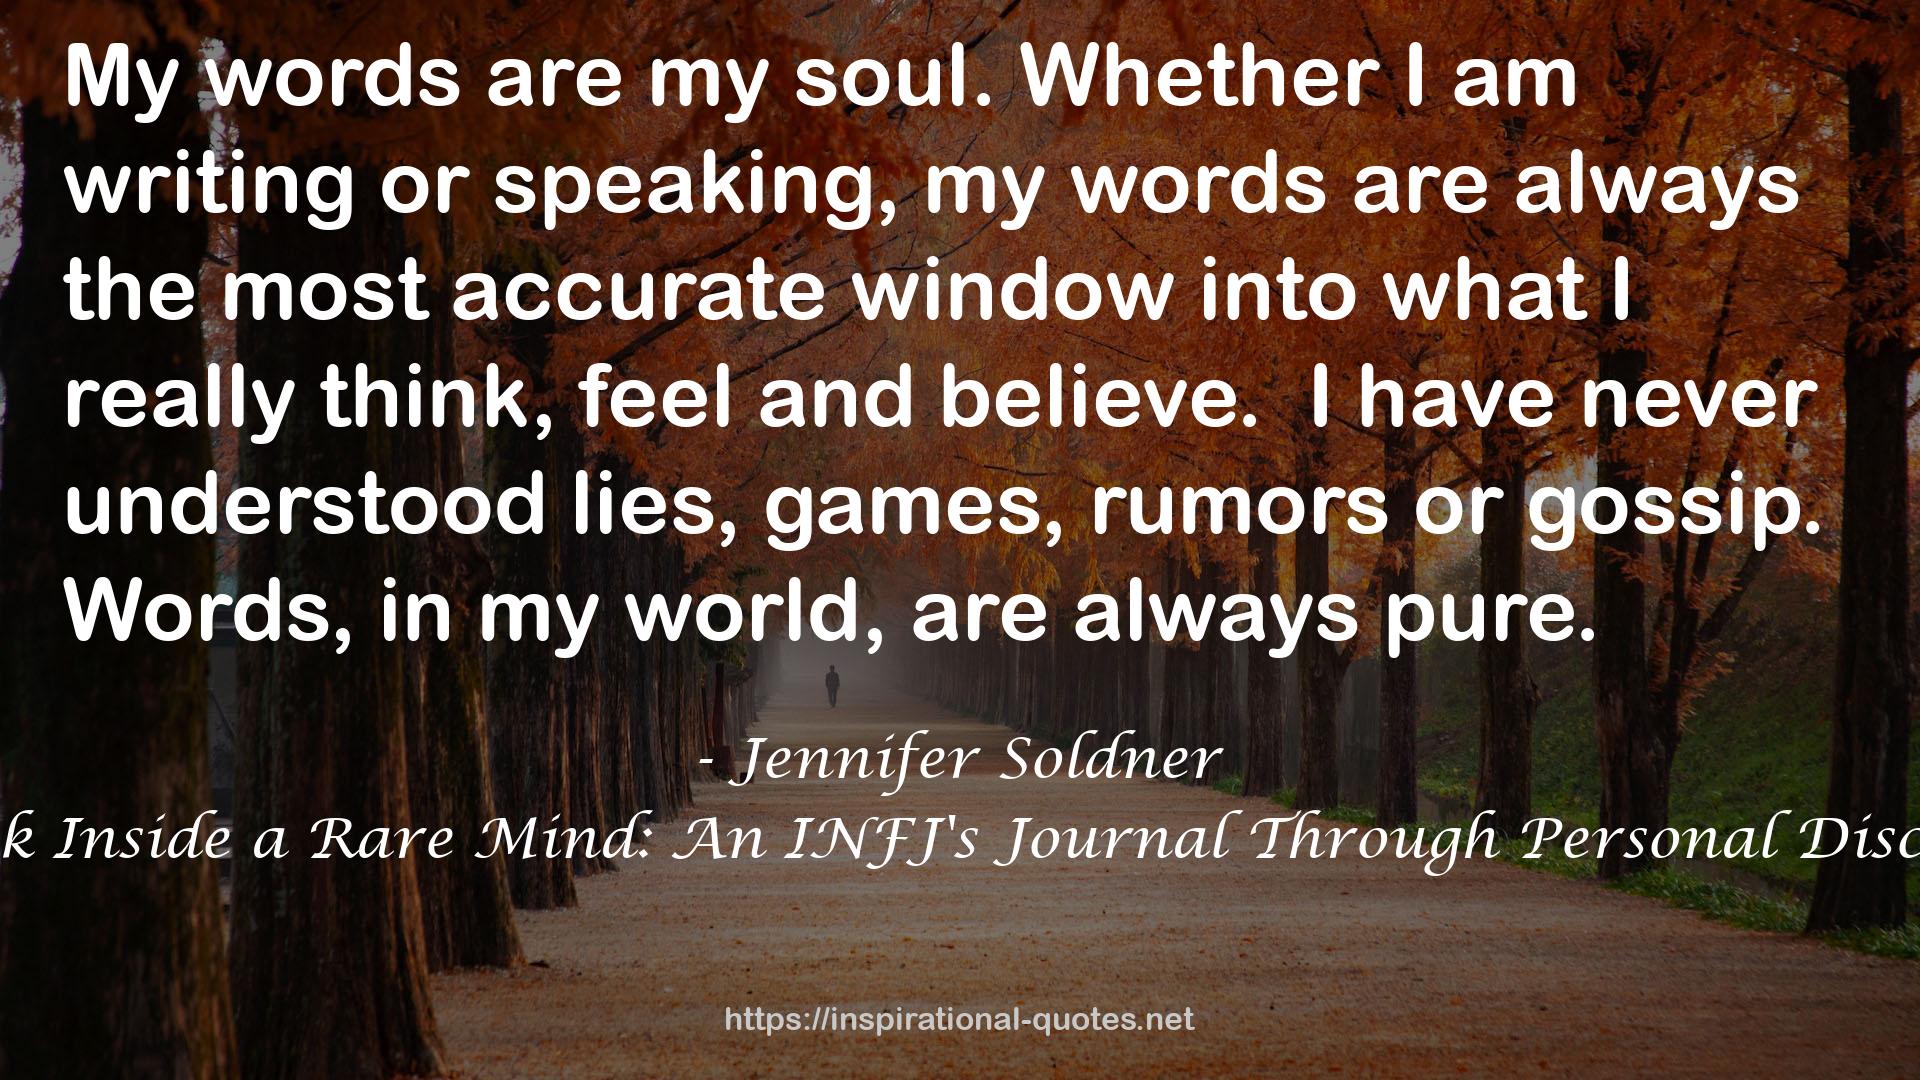 A Look Inside a Rare Mind: An INFJ's Journal Through Personal Discovery QUOTES